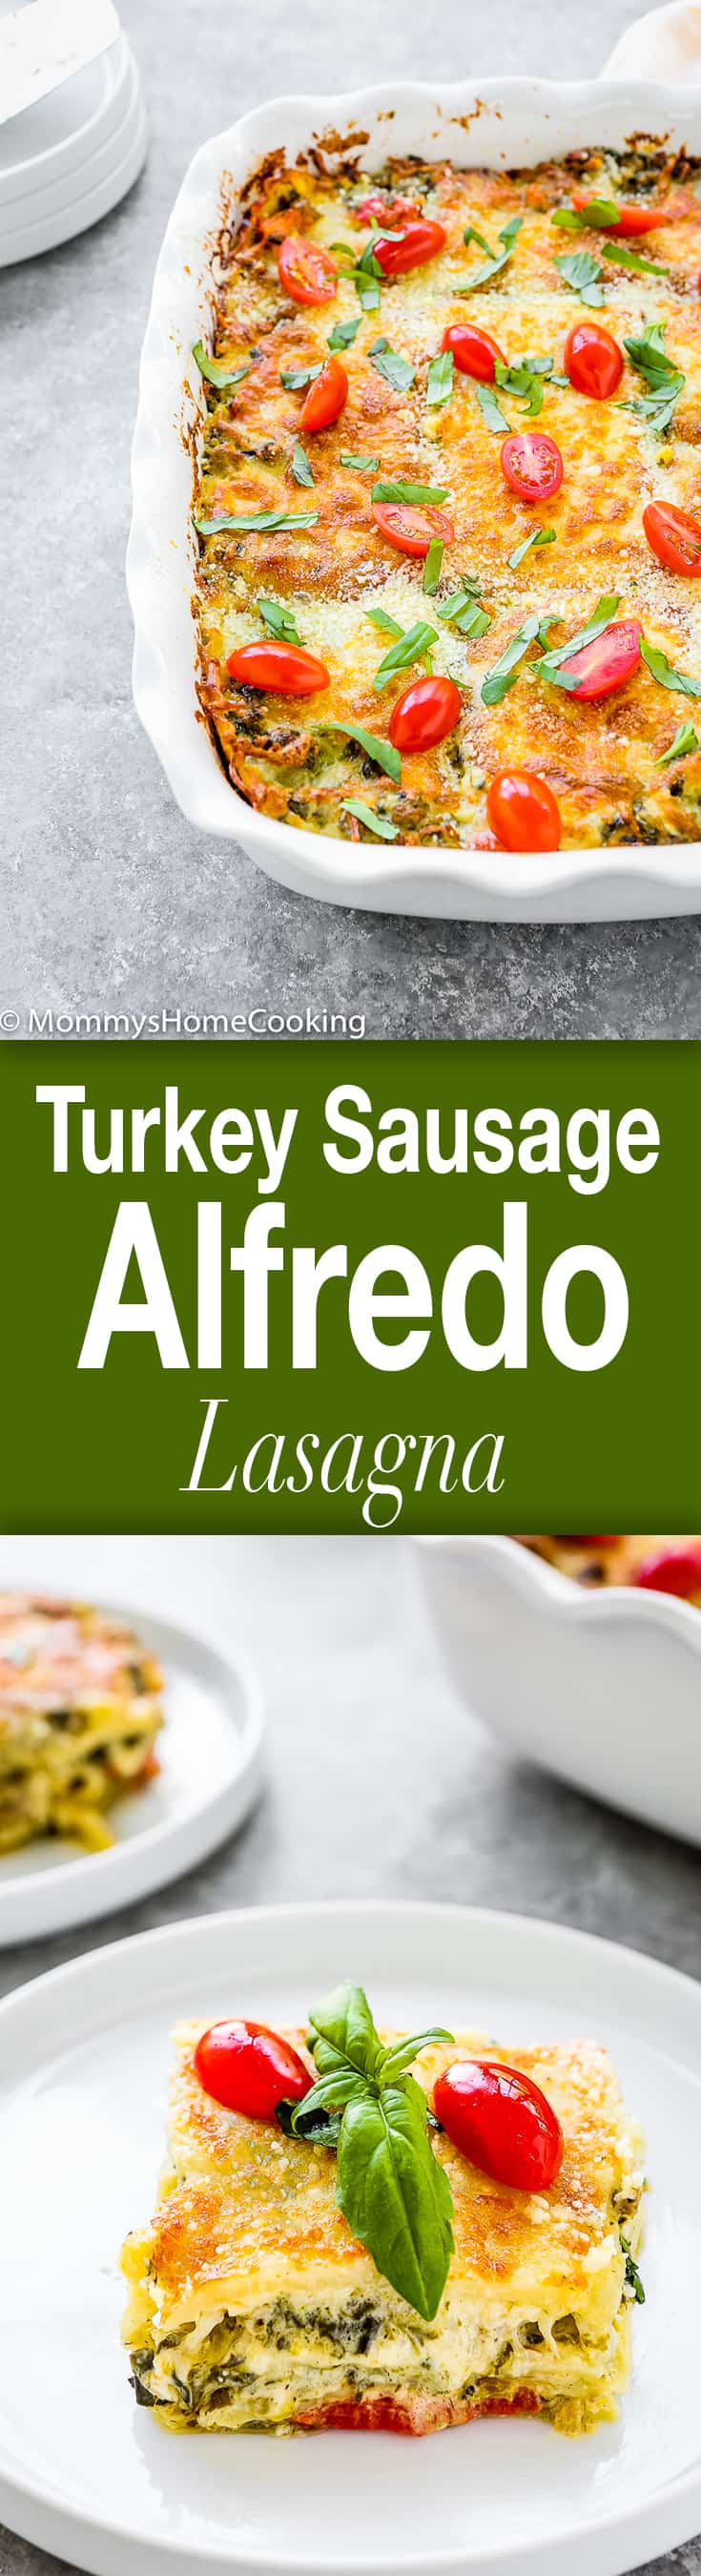 This is an amazingly creamy, cheesy, full-flavored Turkey Sausage Alfredo Lasagna is easy enough for any weeknight and sure to please kids and adults. https://mommyshomecooking.com